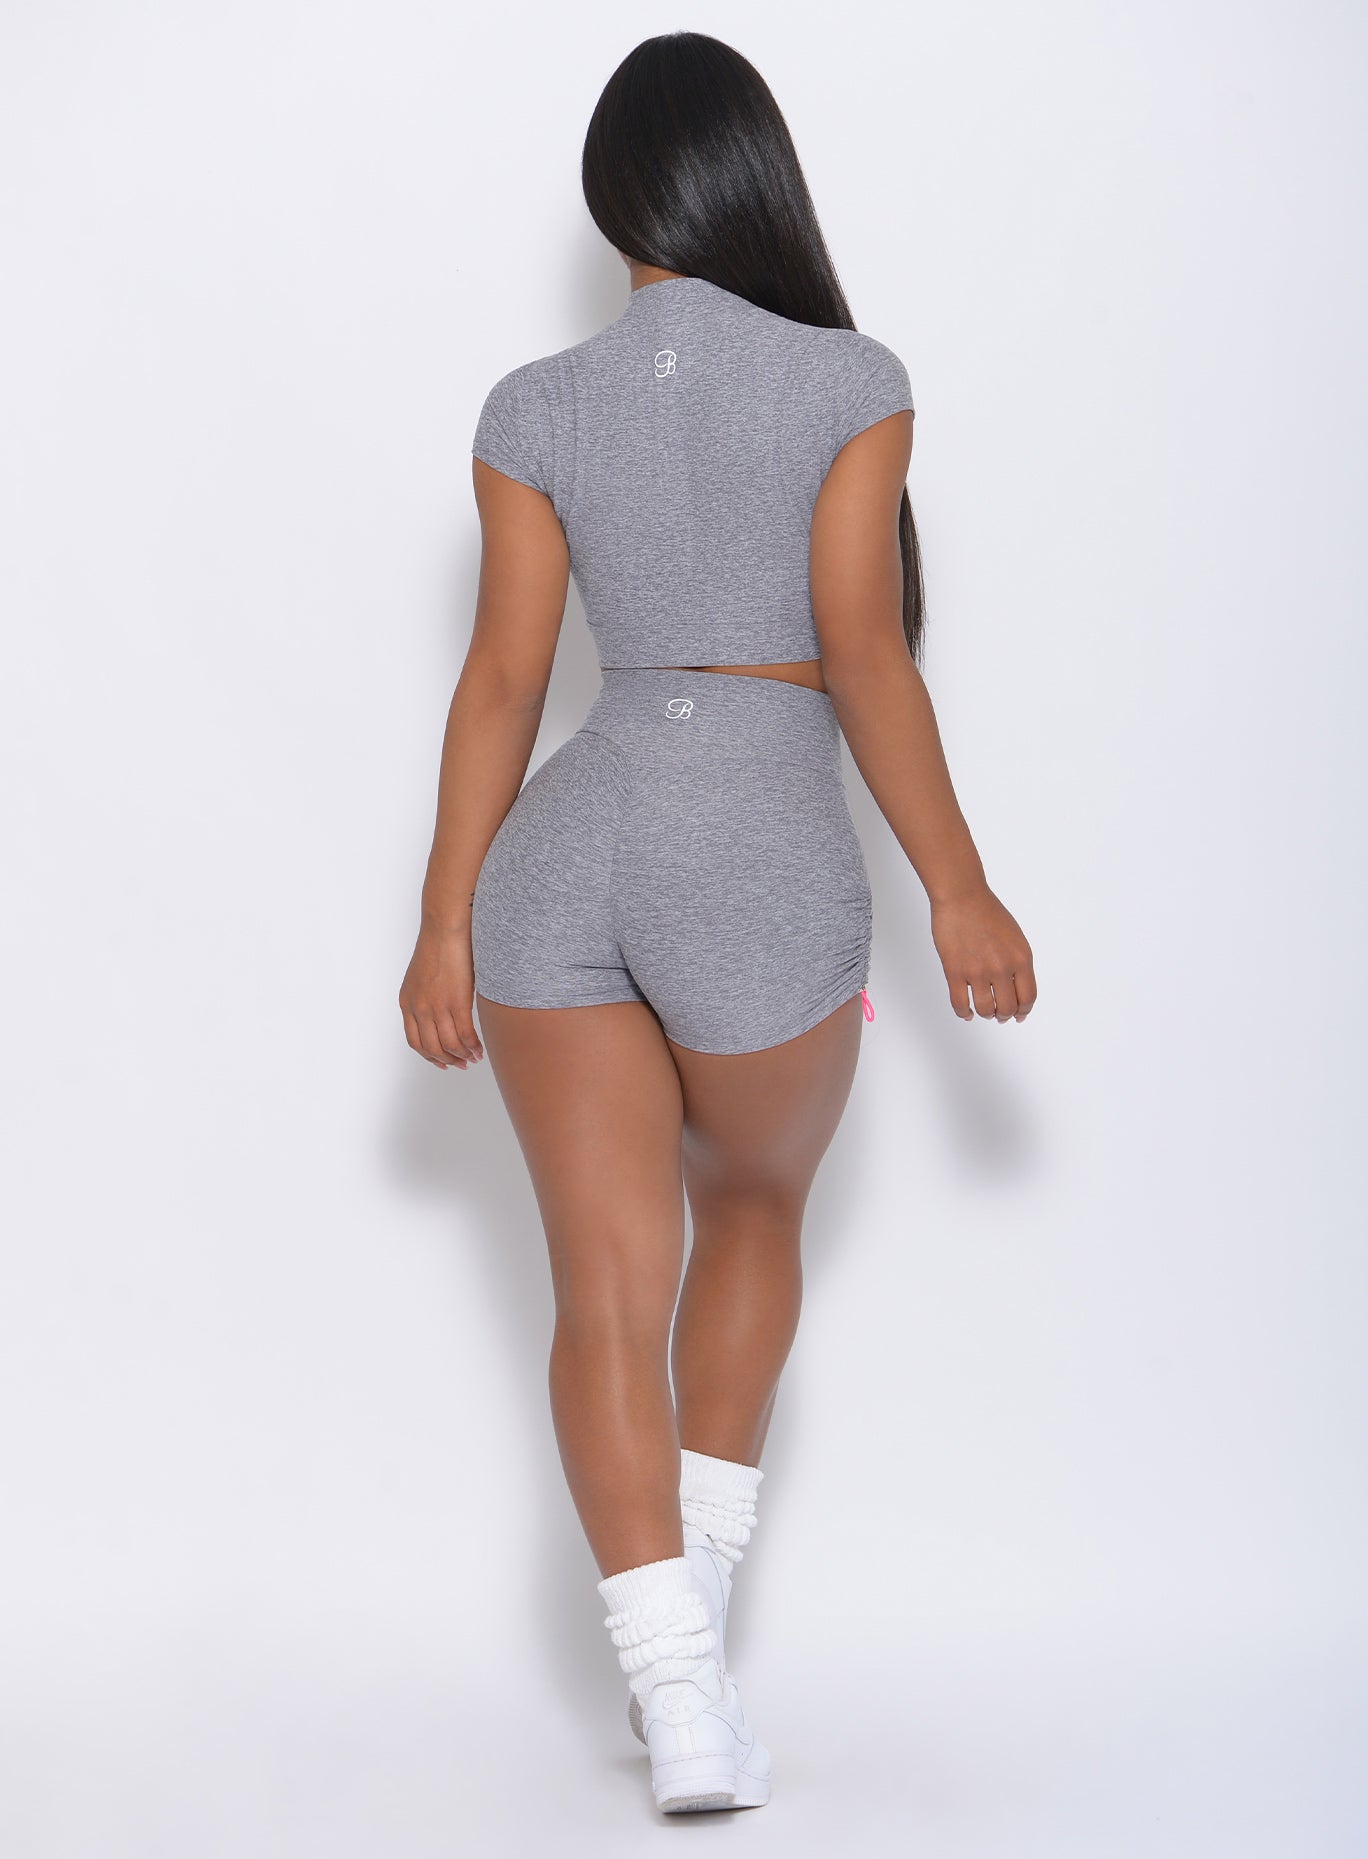 Back view of the model wearing our contour shorts in cloud color and a matching top